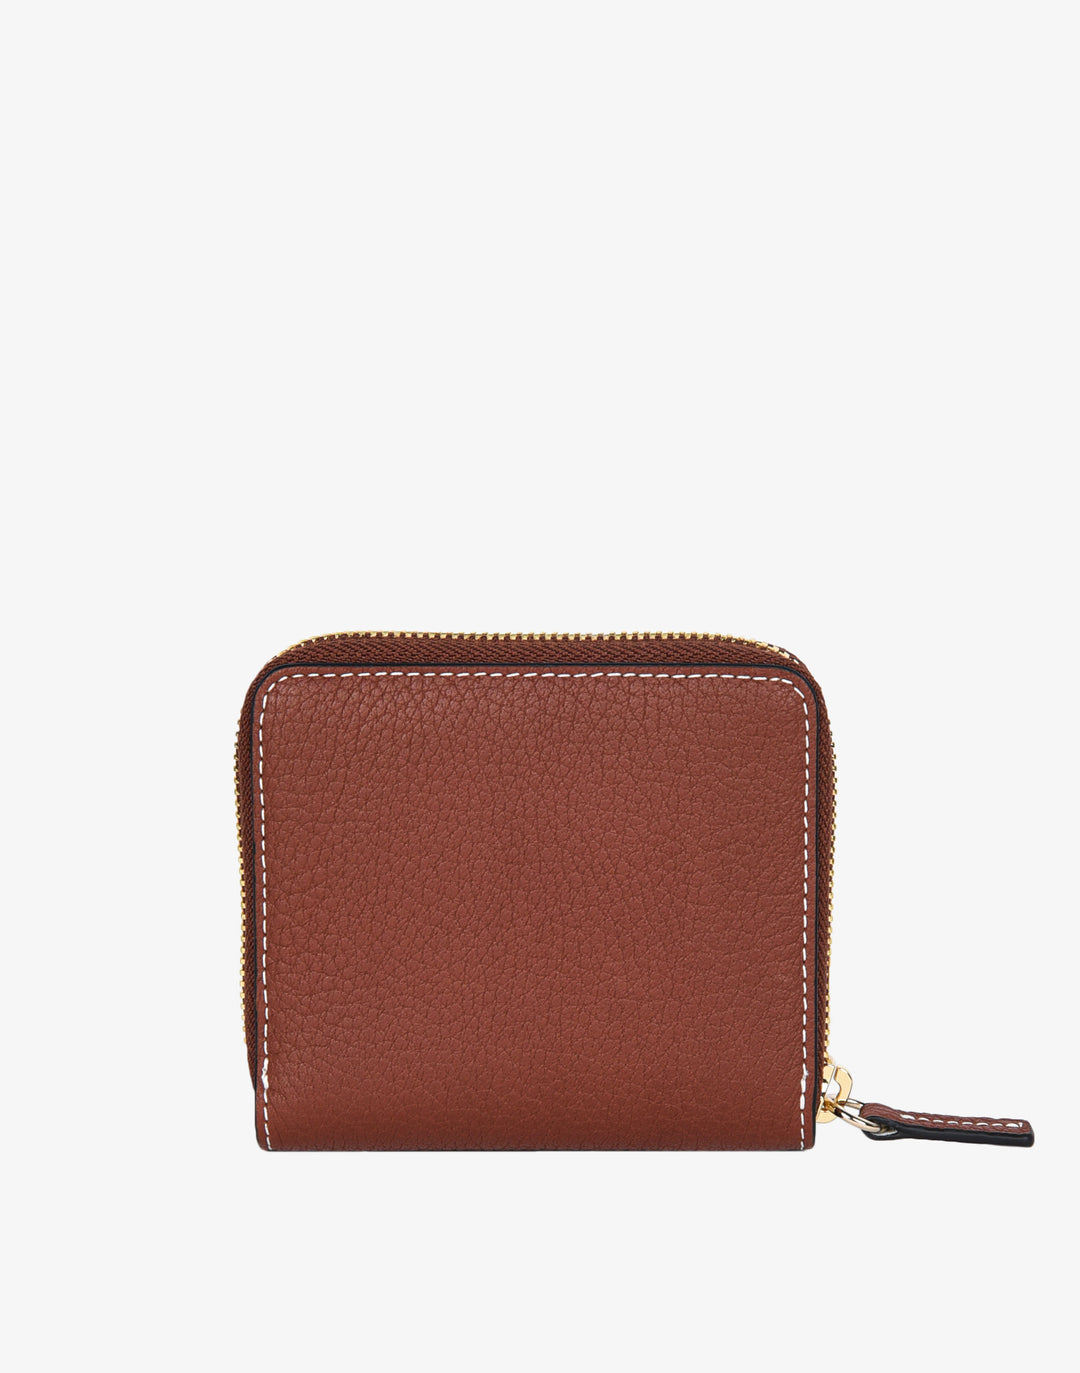 hyer goods recycled leather zip around wallet saddle brown tan#color_saddle-brown